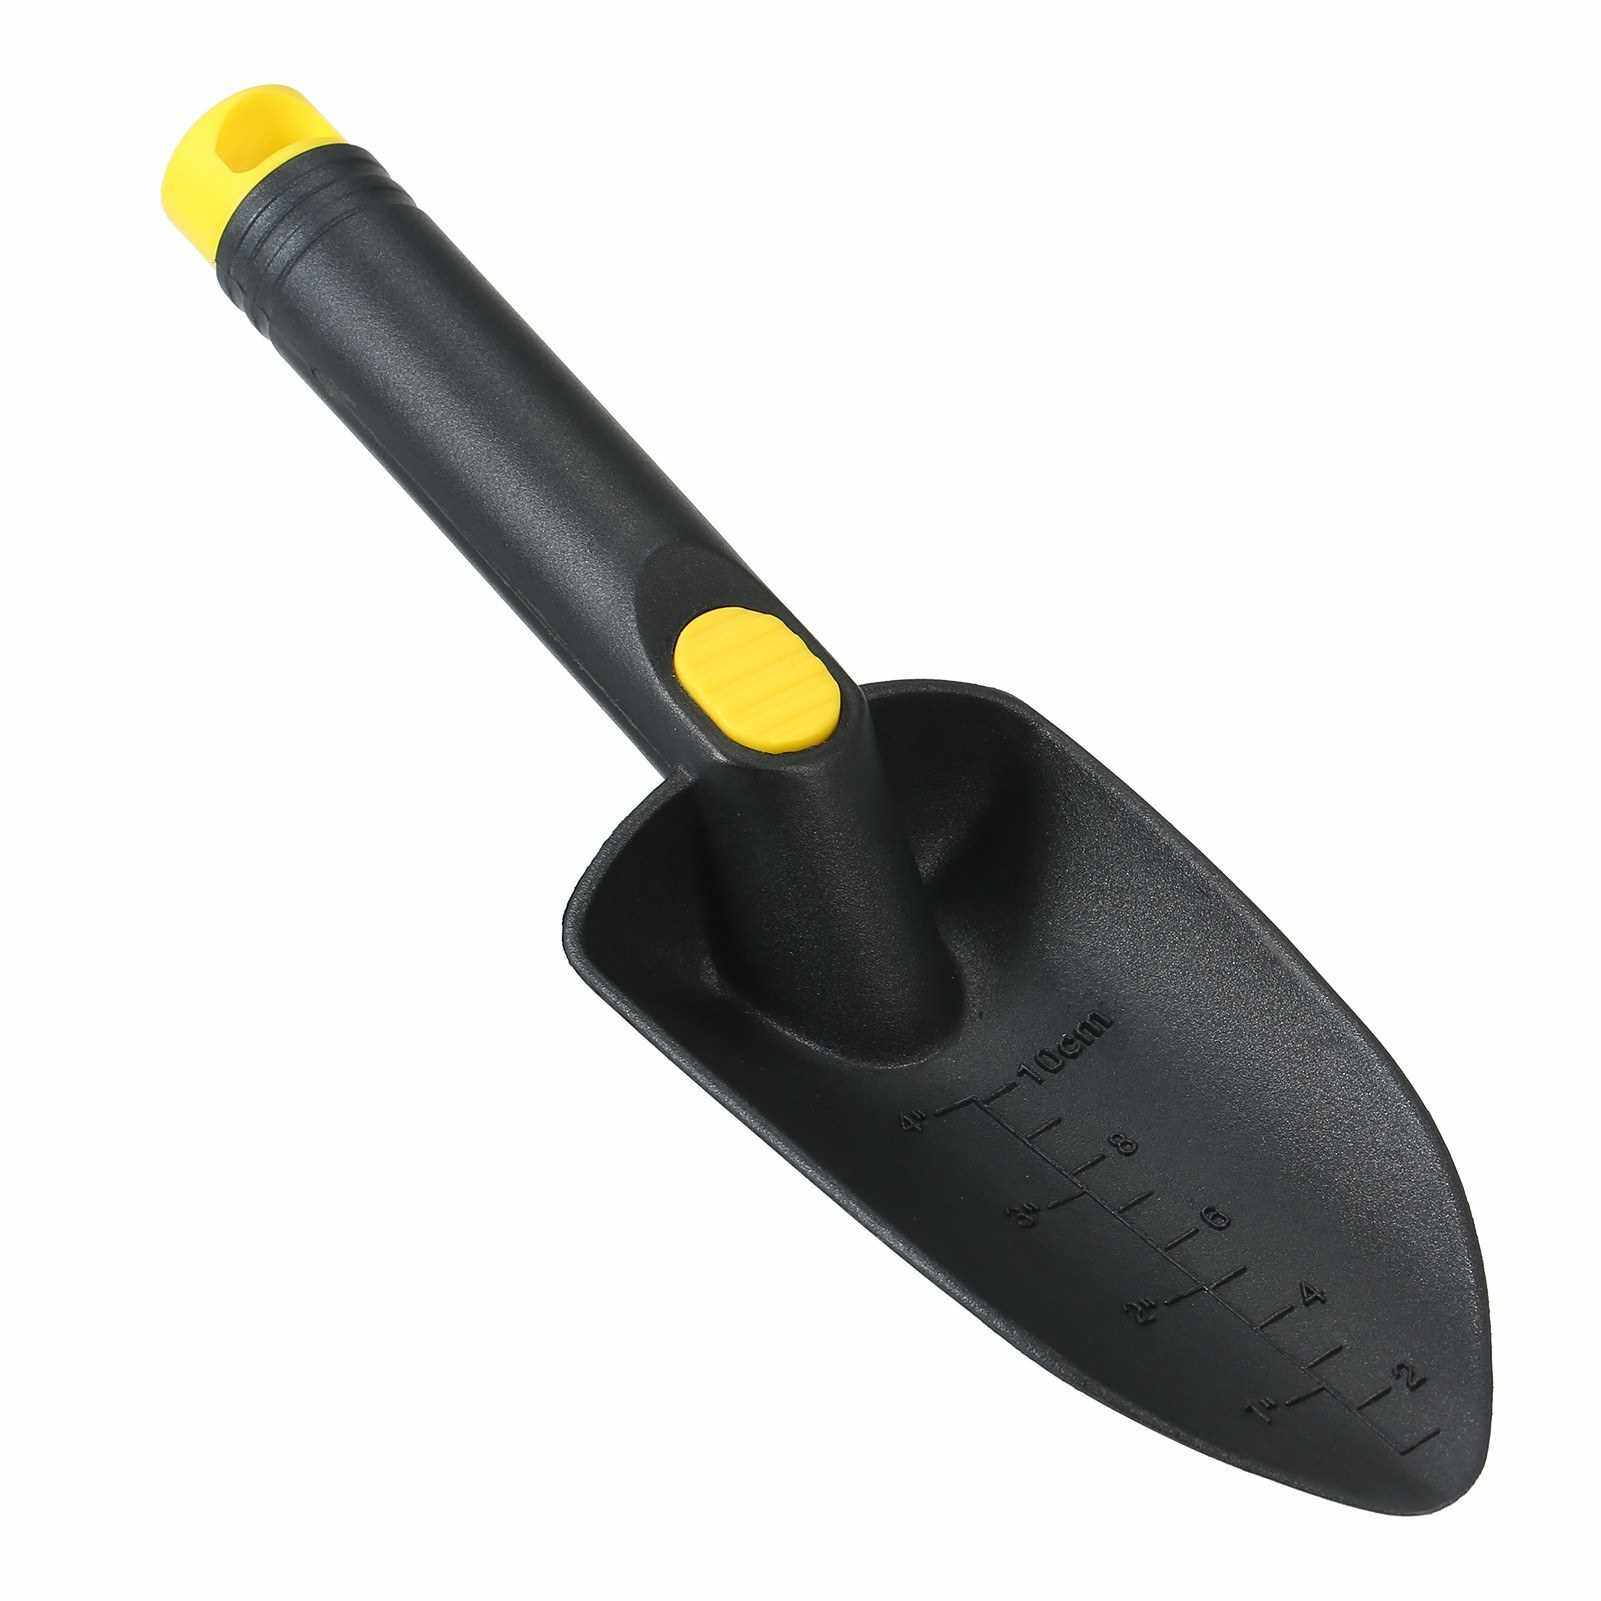 Sand Shovel Digging Tool Accessories for Metal Detecting and Treasure Hunting (1)